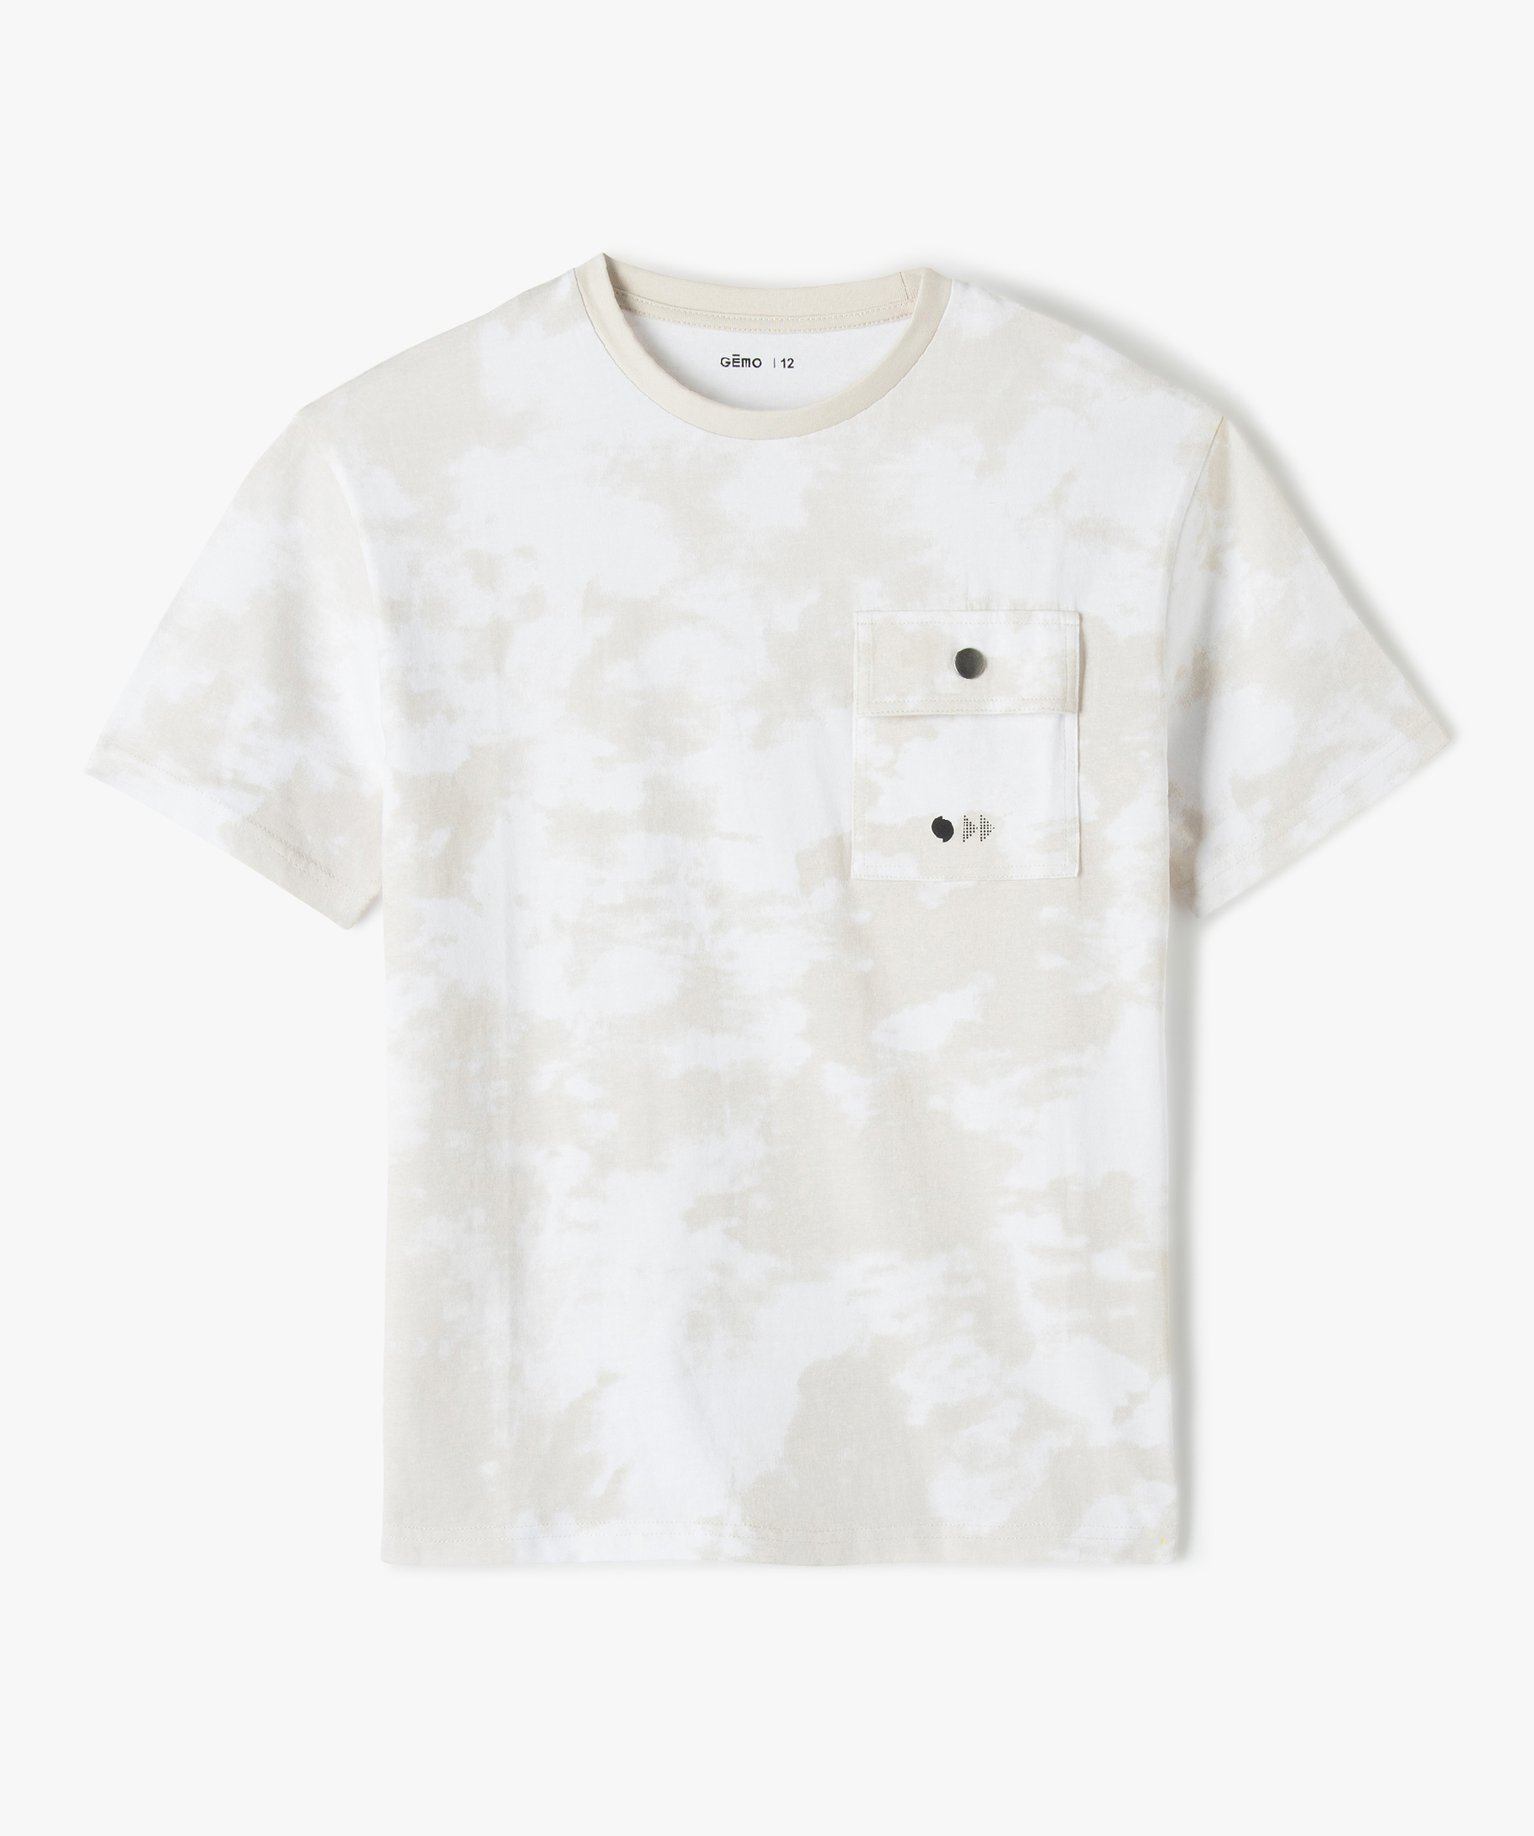 tee-shirt garcon a manches courtes bicolore tie-and-dye imprime tee-shirts